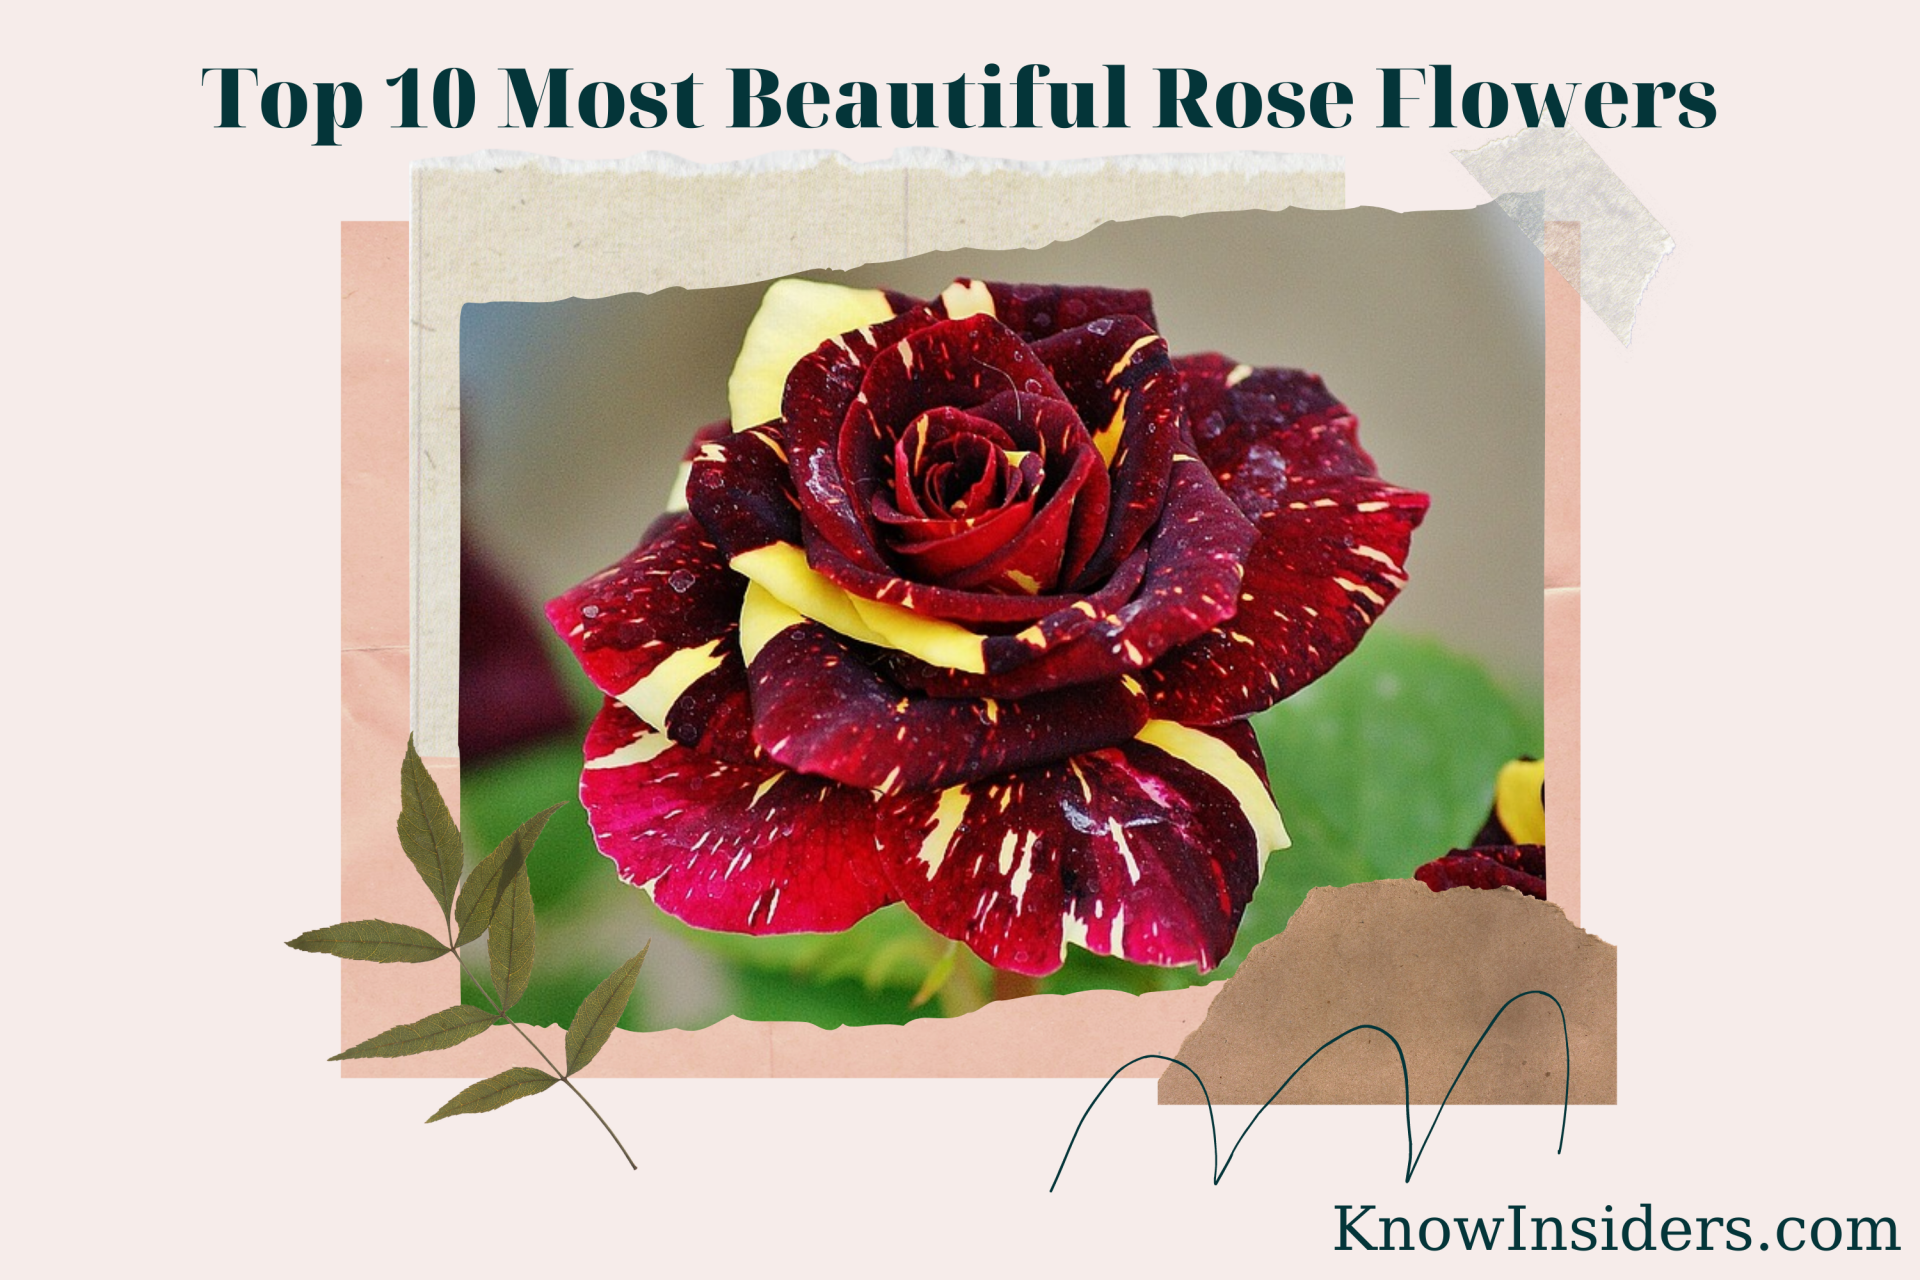 Top 10 Most Beautiful Rose Flowers From Around the World